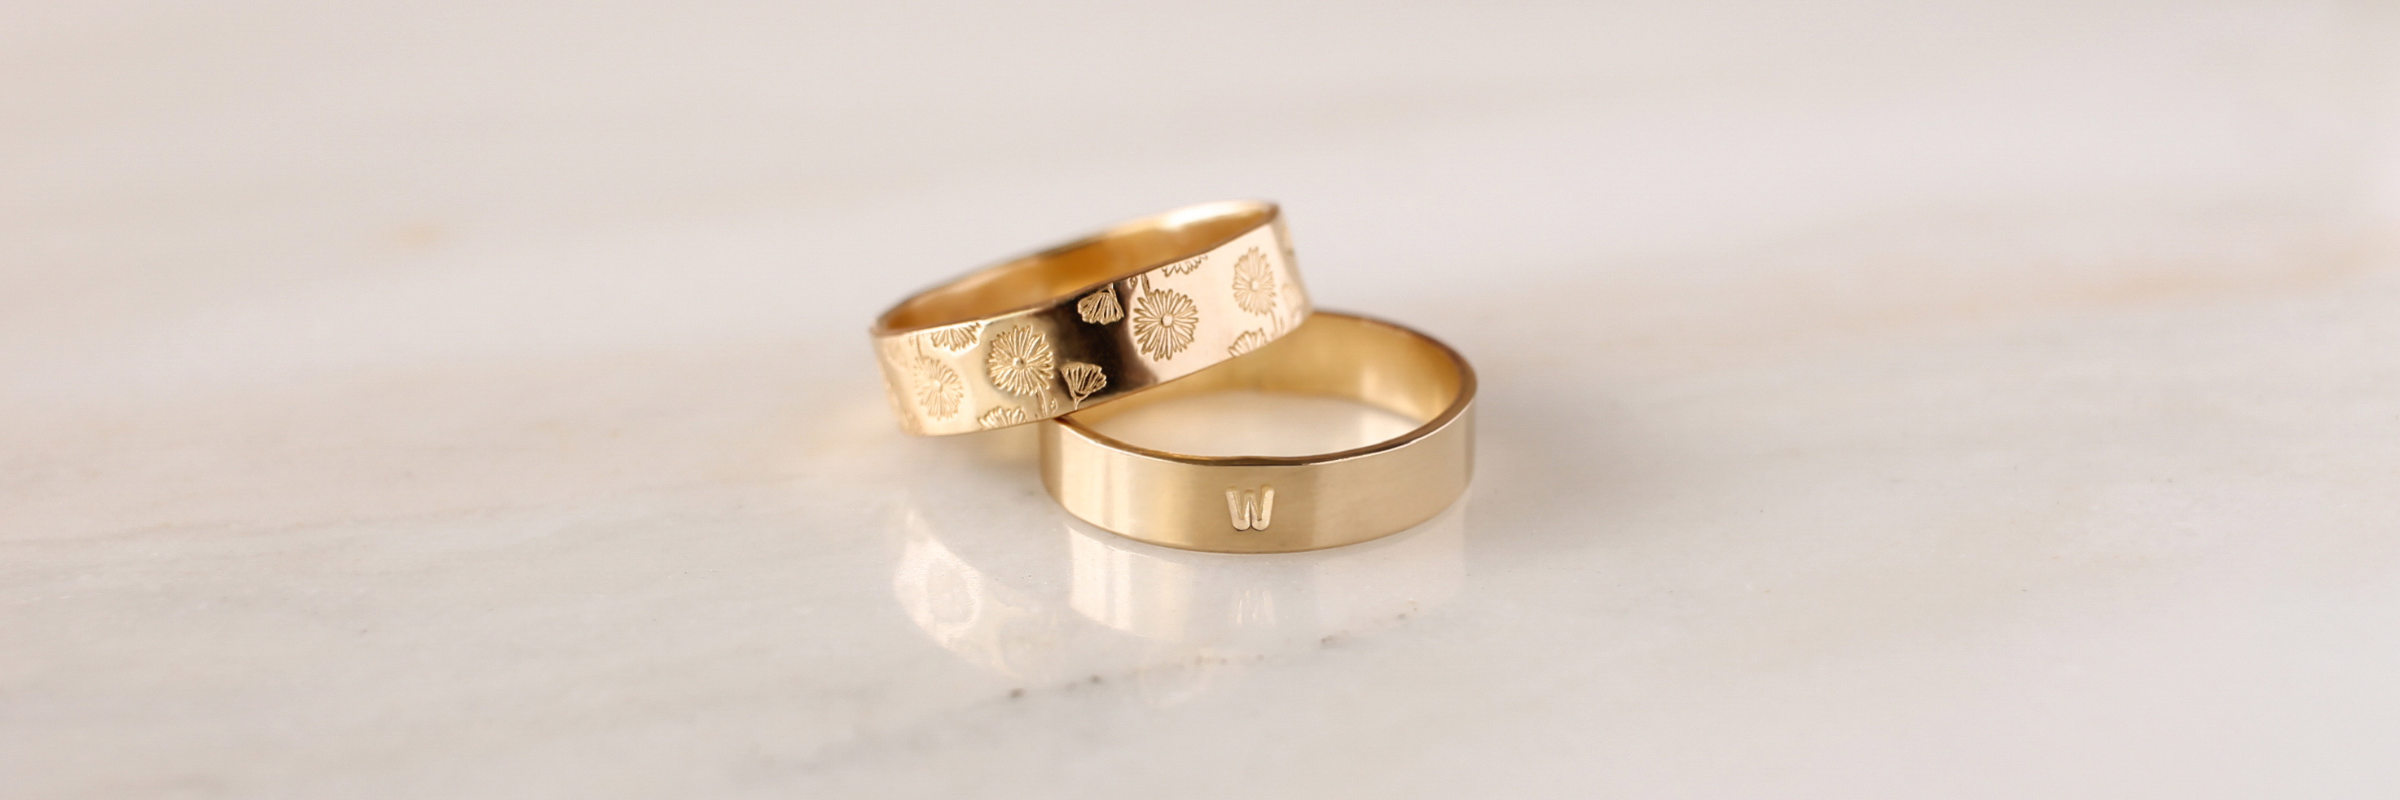 NOLIA Jewelry • 14k Gold Filled Rings • What is Gold Filled and How Do I Care + Clean It?